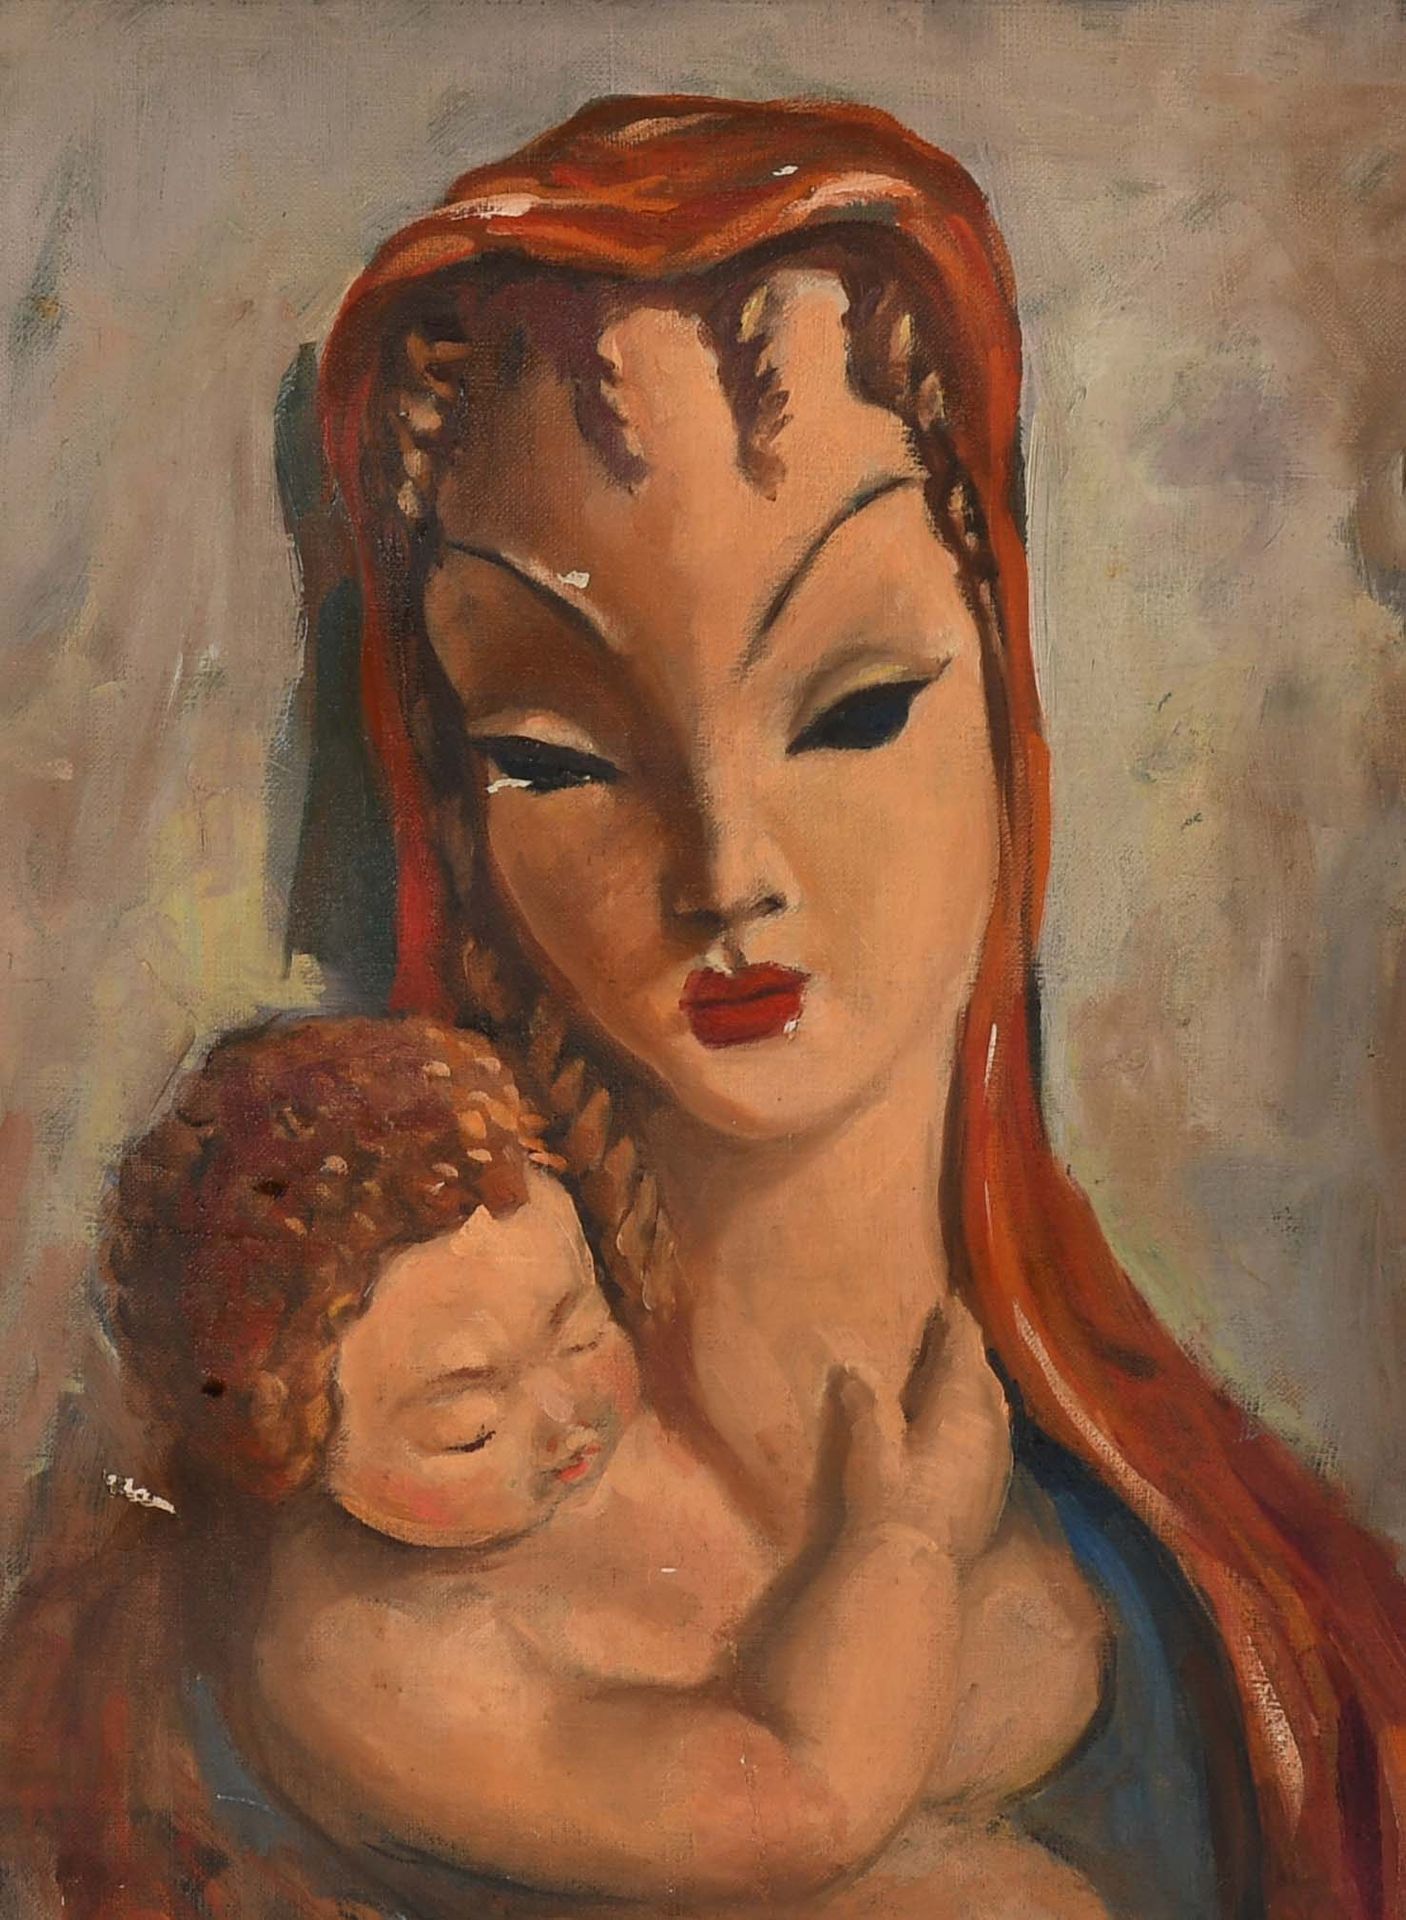 Null Painting

Oil on canvas : "Maternity".

Dimensions: 42 cm x 32 cm.